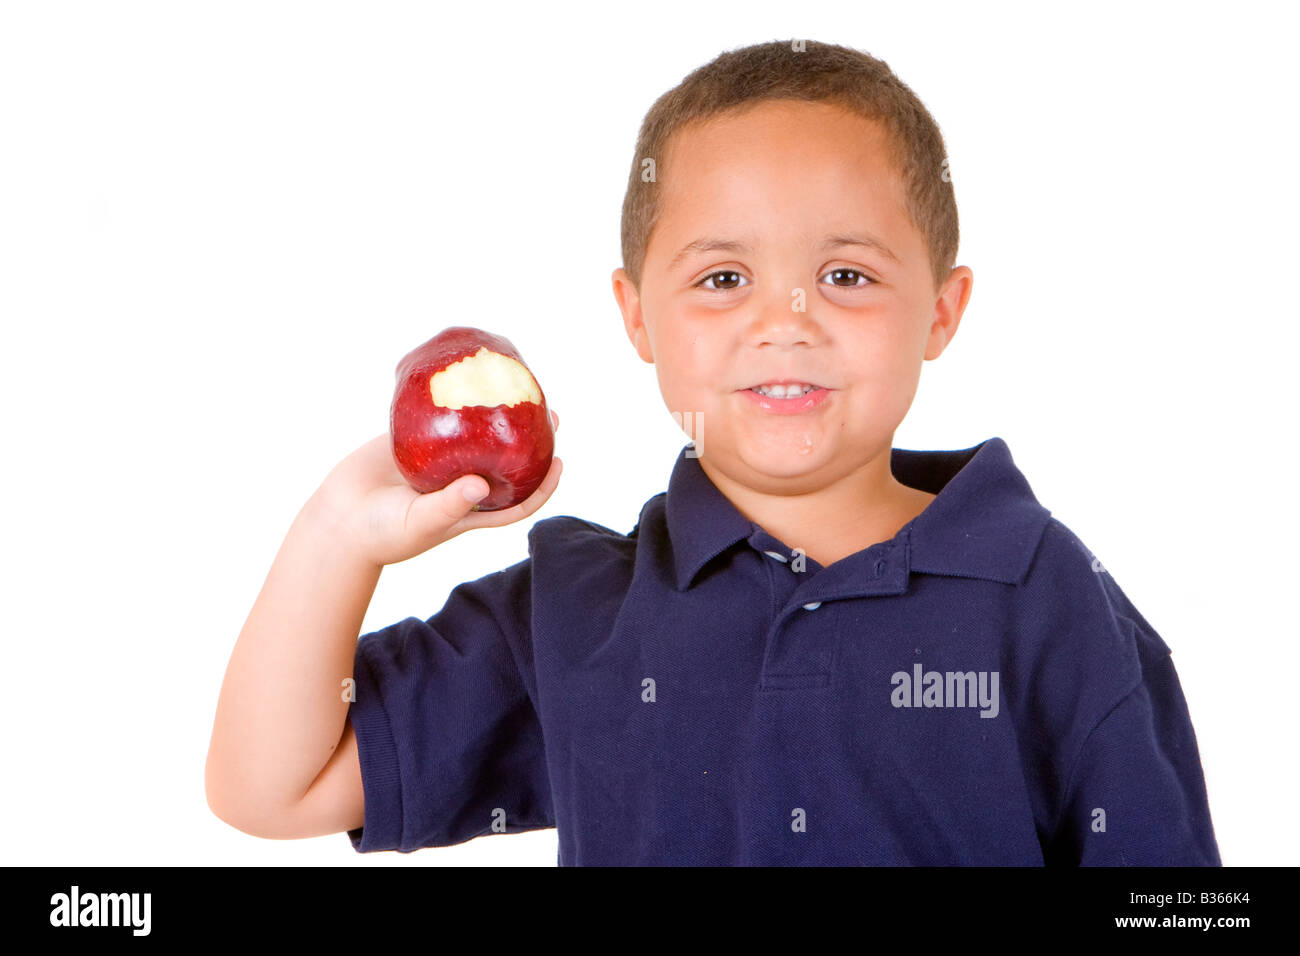 Young latino boy holding a bright red apple isolated against a white background Stock Photo